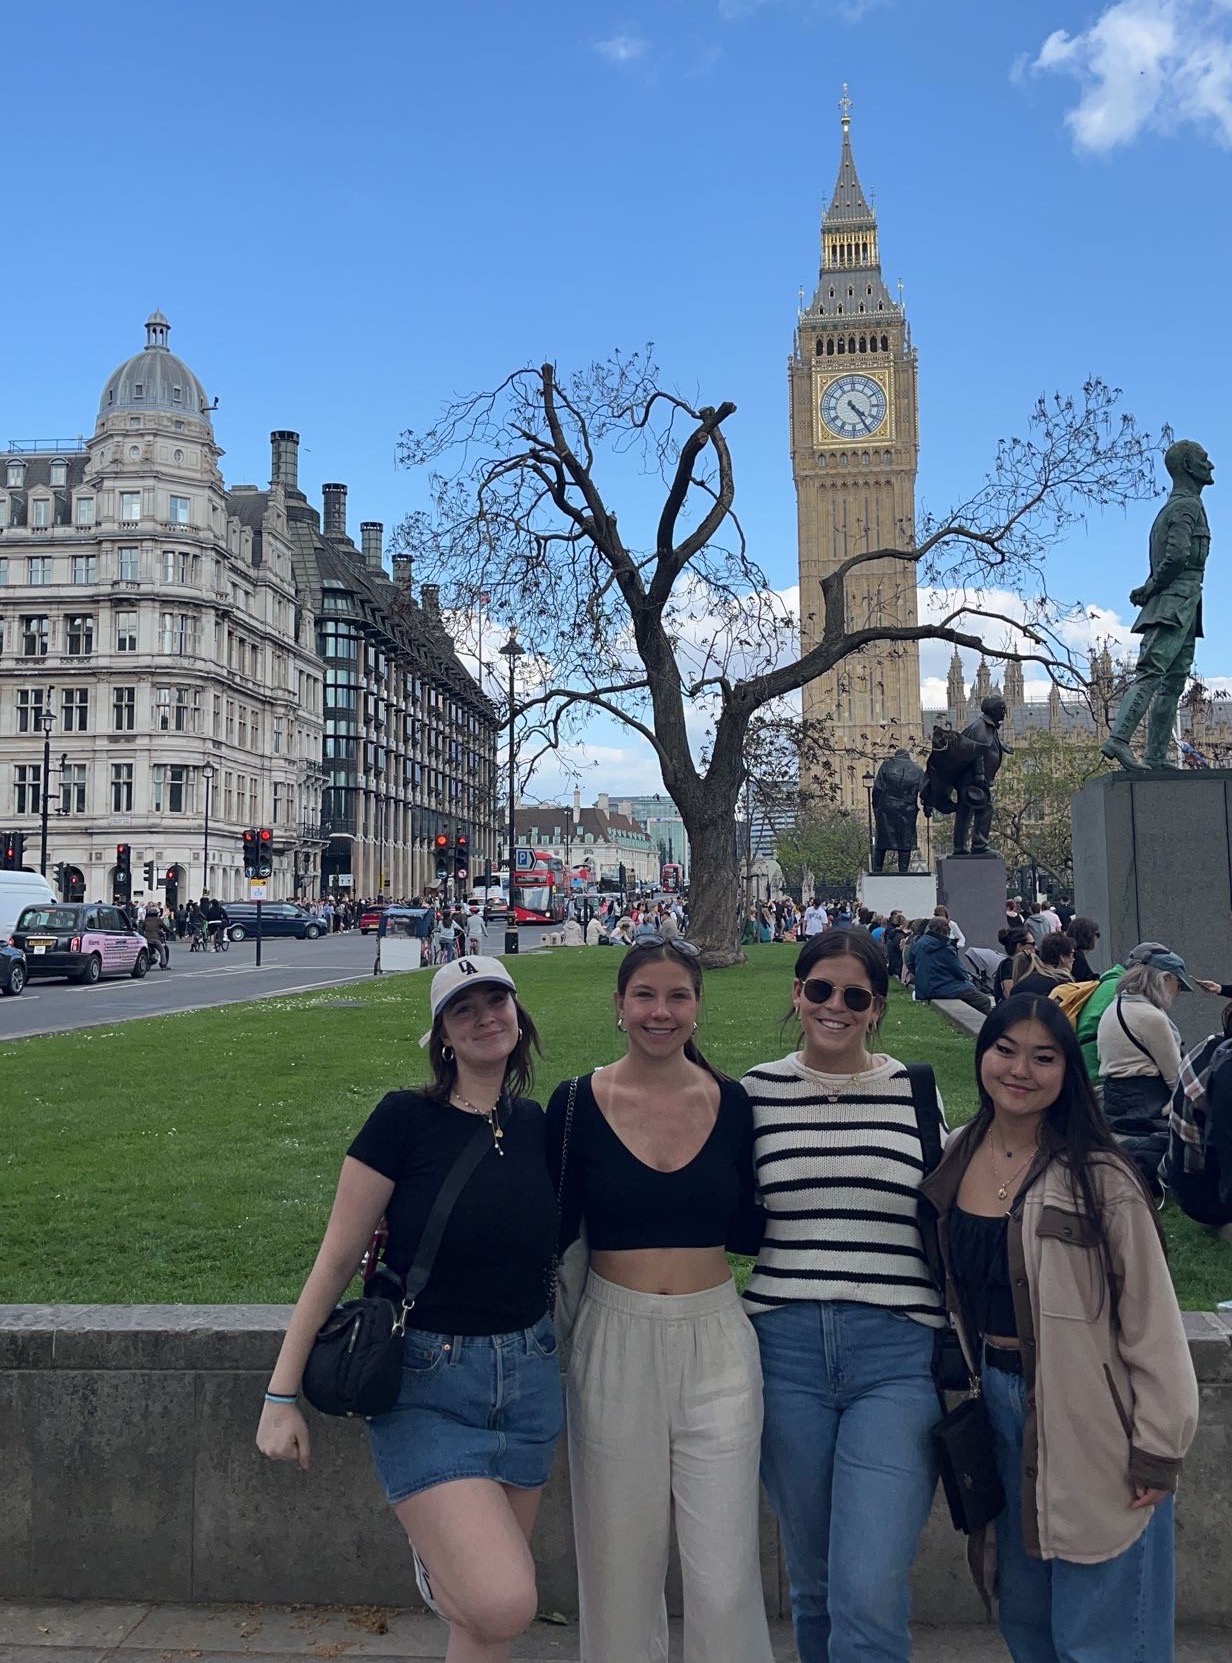 Four students standing and smiling in the foreground with the Big Ben in the background.